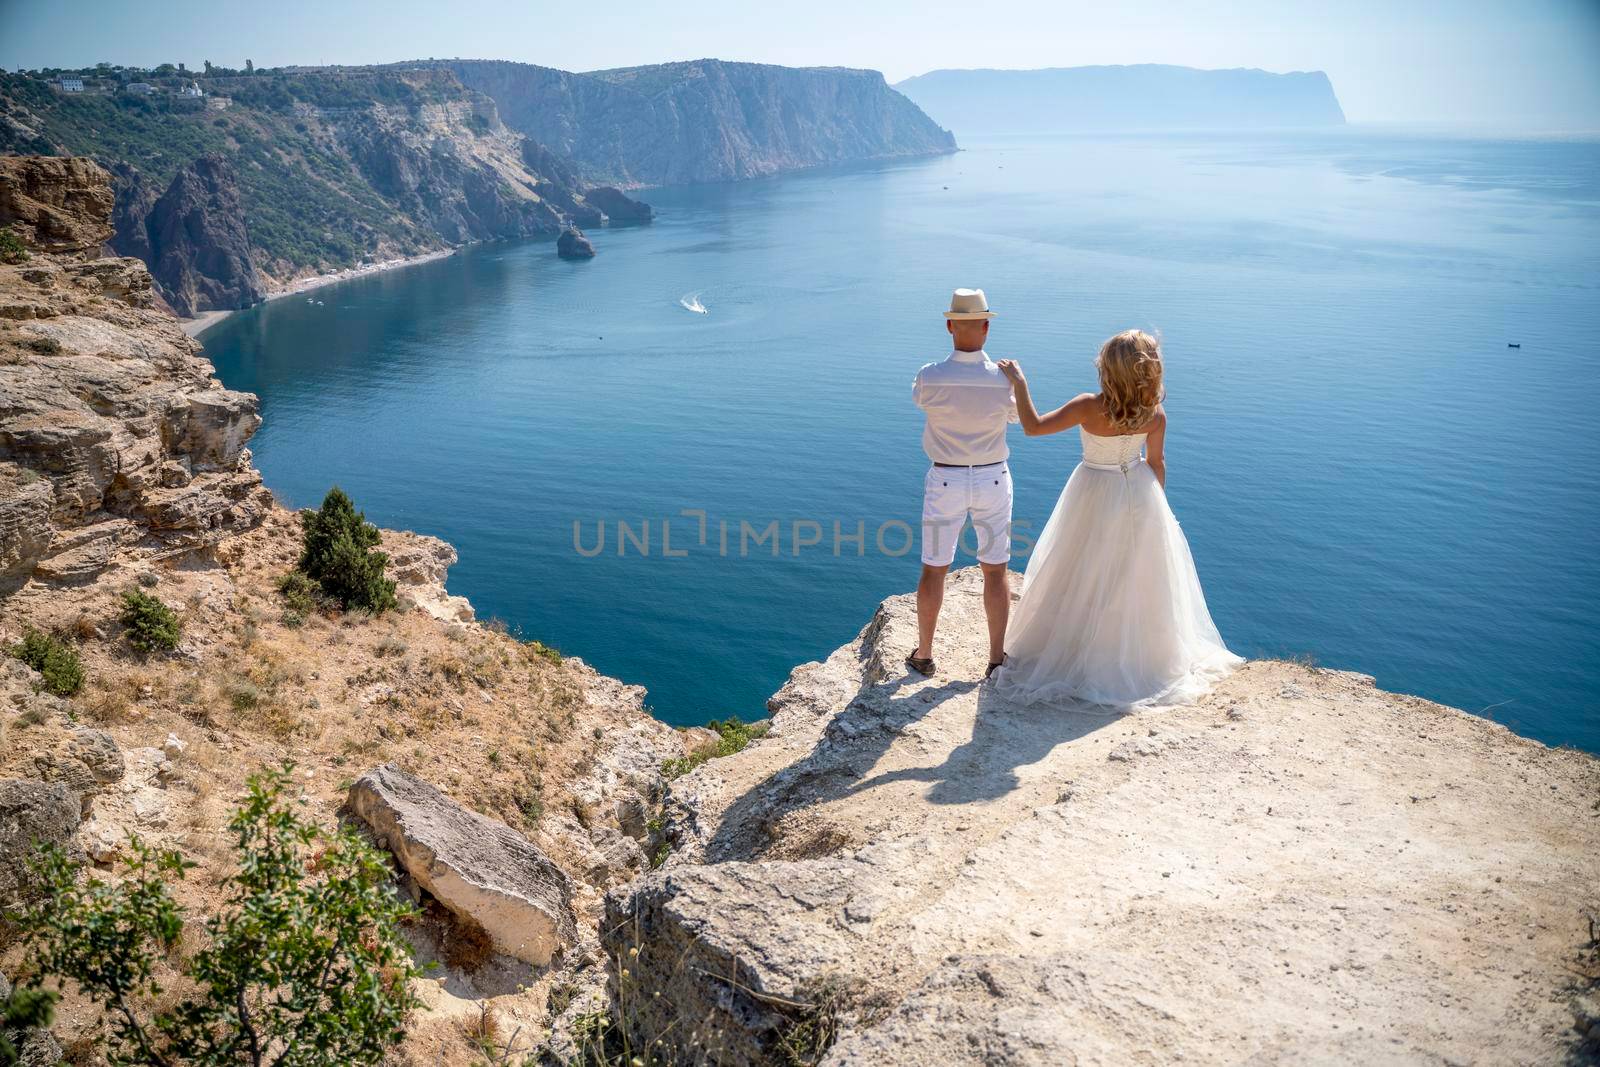 The newlyweds are standing, the bride has put her hand on the groom's shoulder, and look at the beautiful seascape Fiolent. The bride in a wedding dress, the groom in a white shirt, shorts, hat.